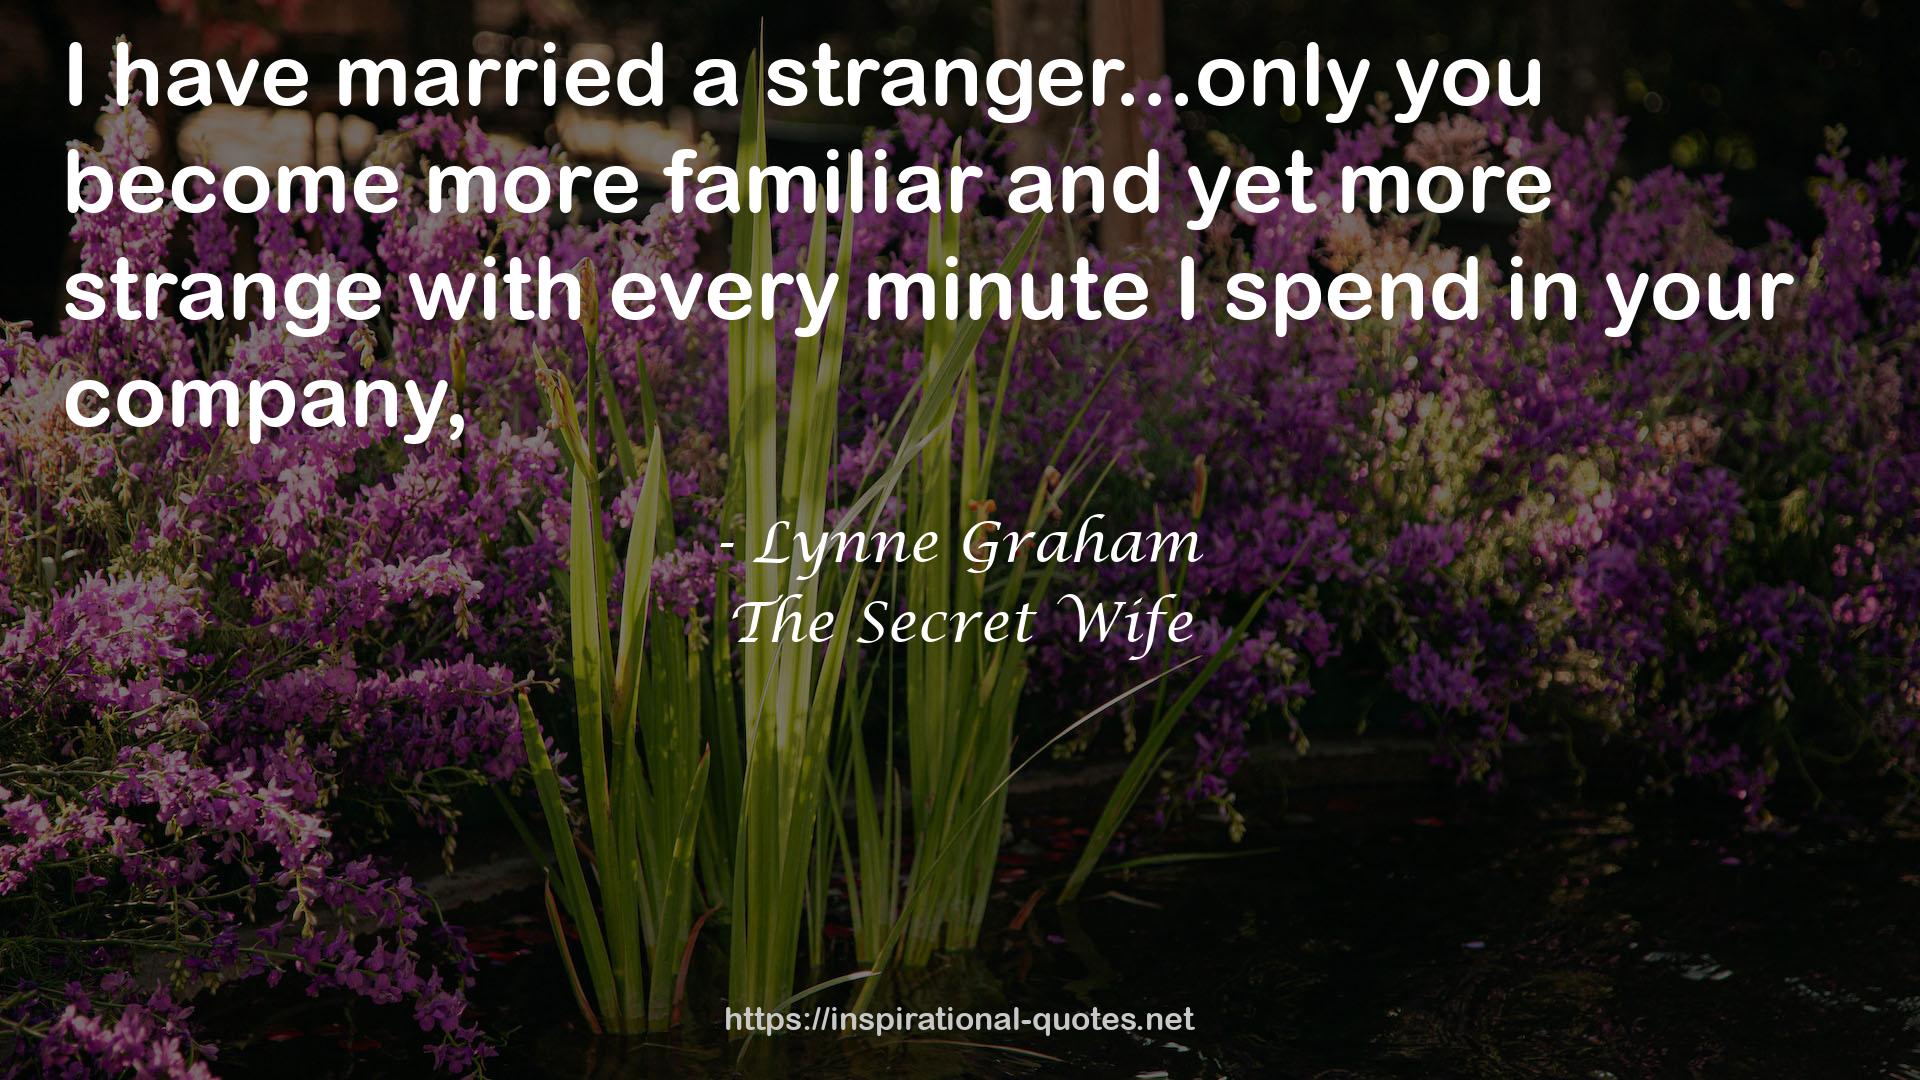 The Secret Wife QUOTES